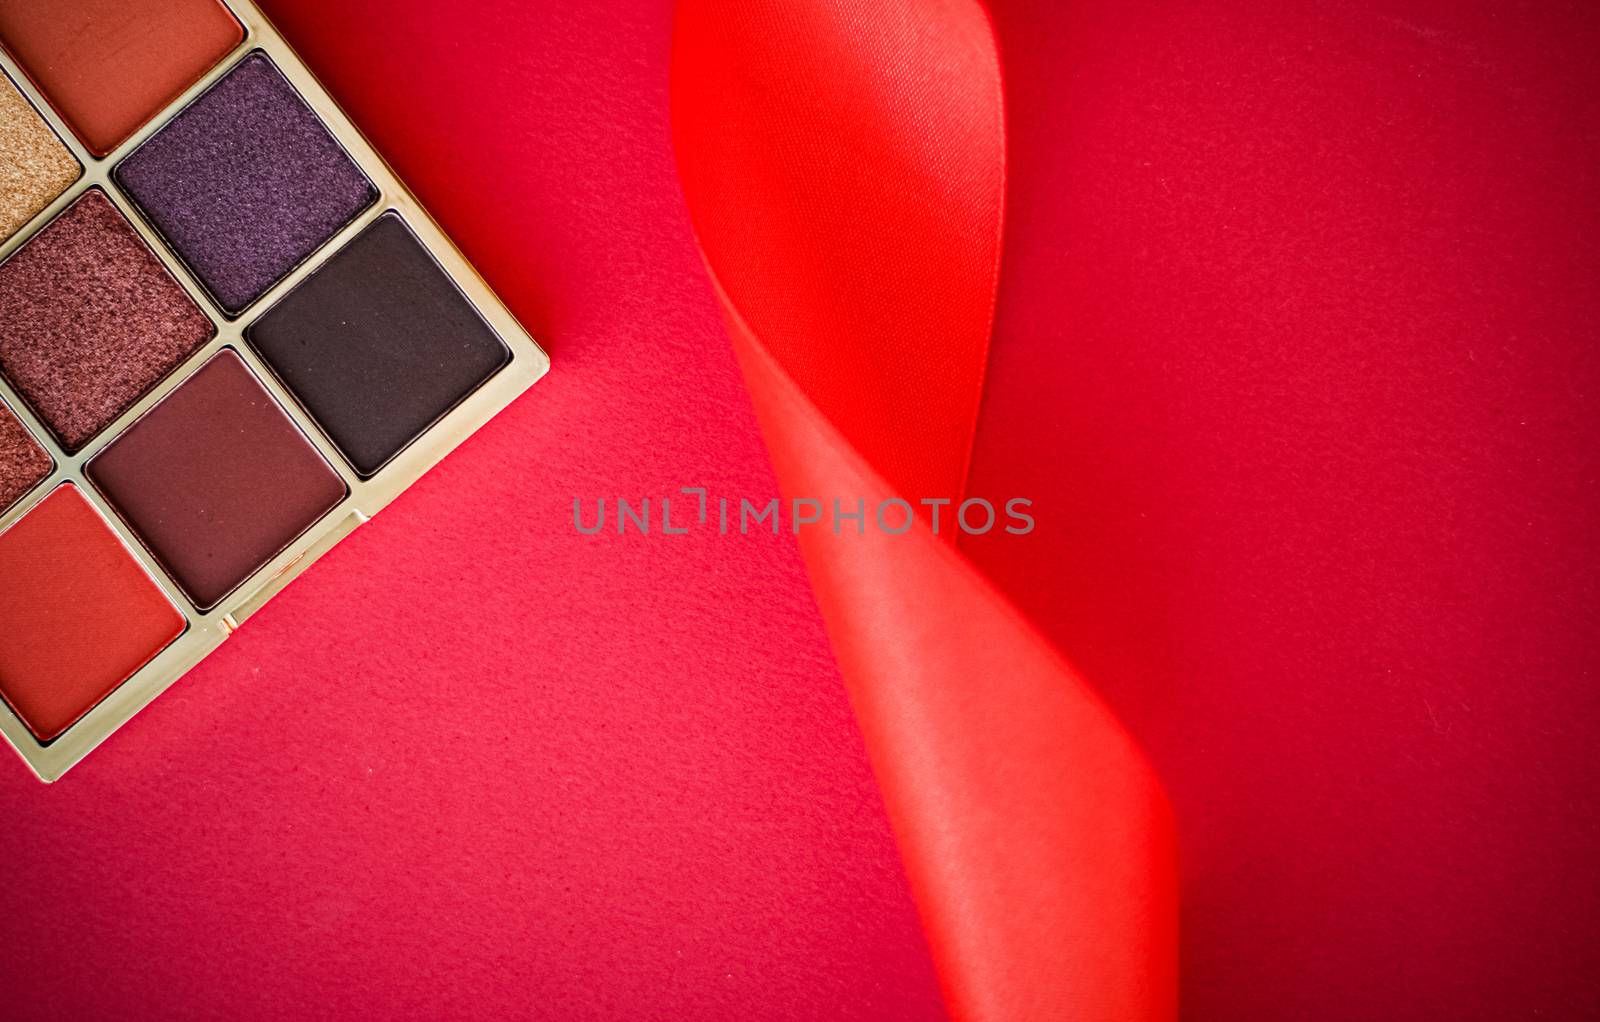 Eyeshadow palette and make-up brush on red background, eye shado by Anneleven